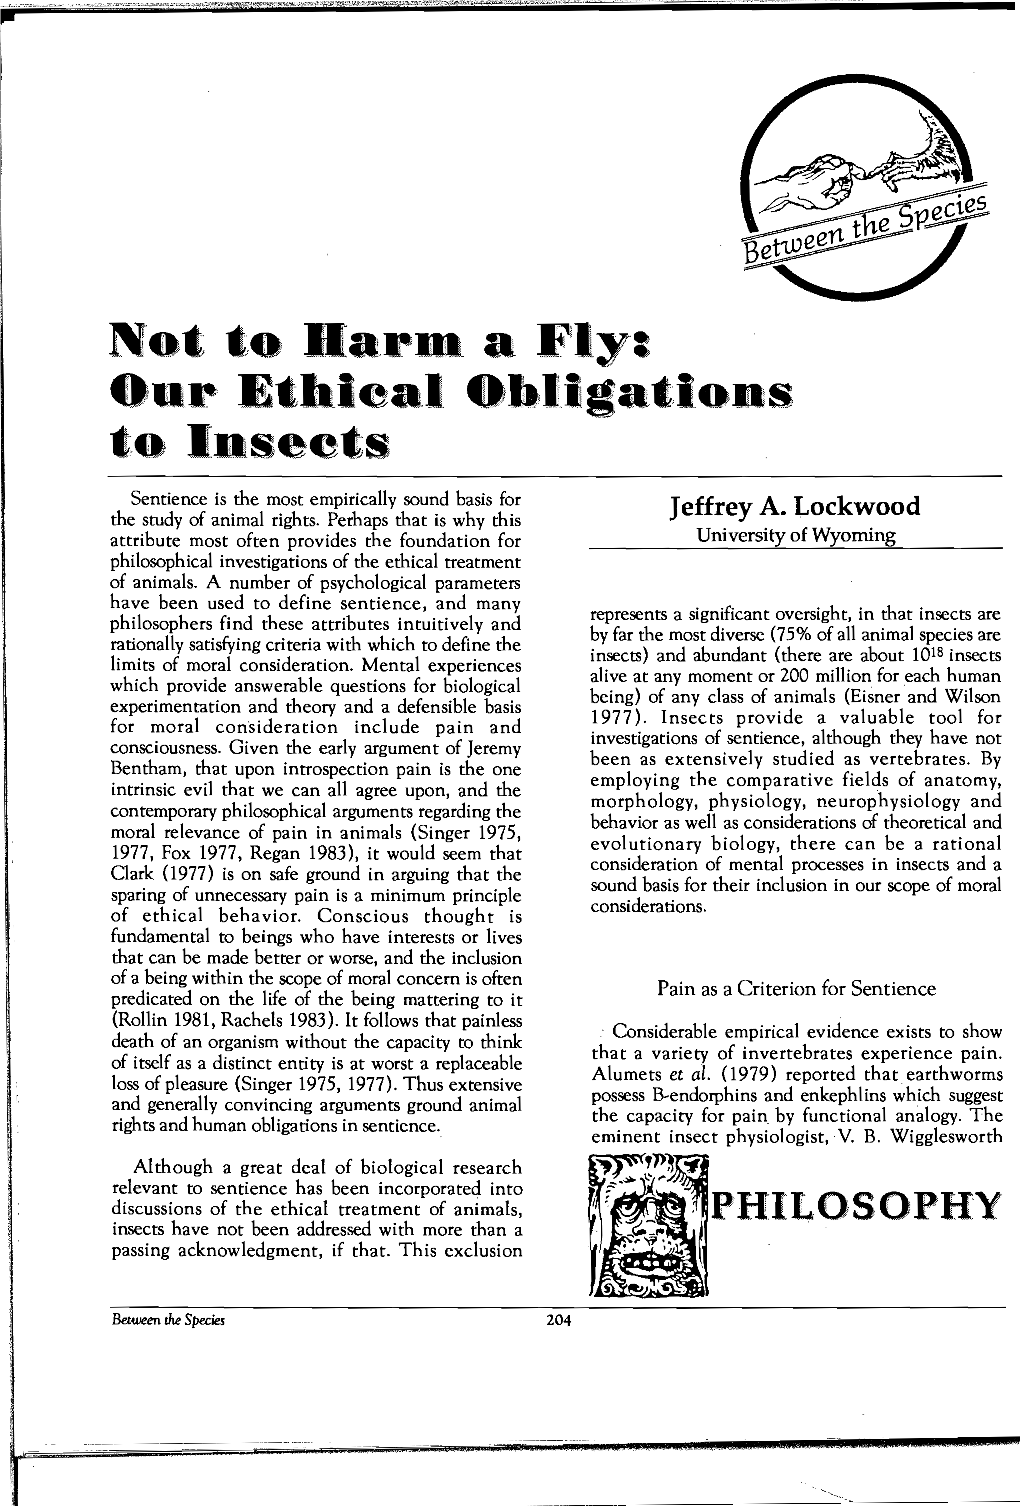 Our Ethical Obligations to Insects